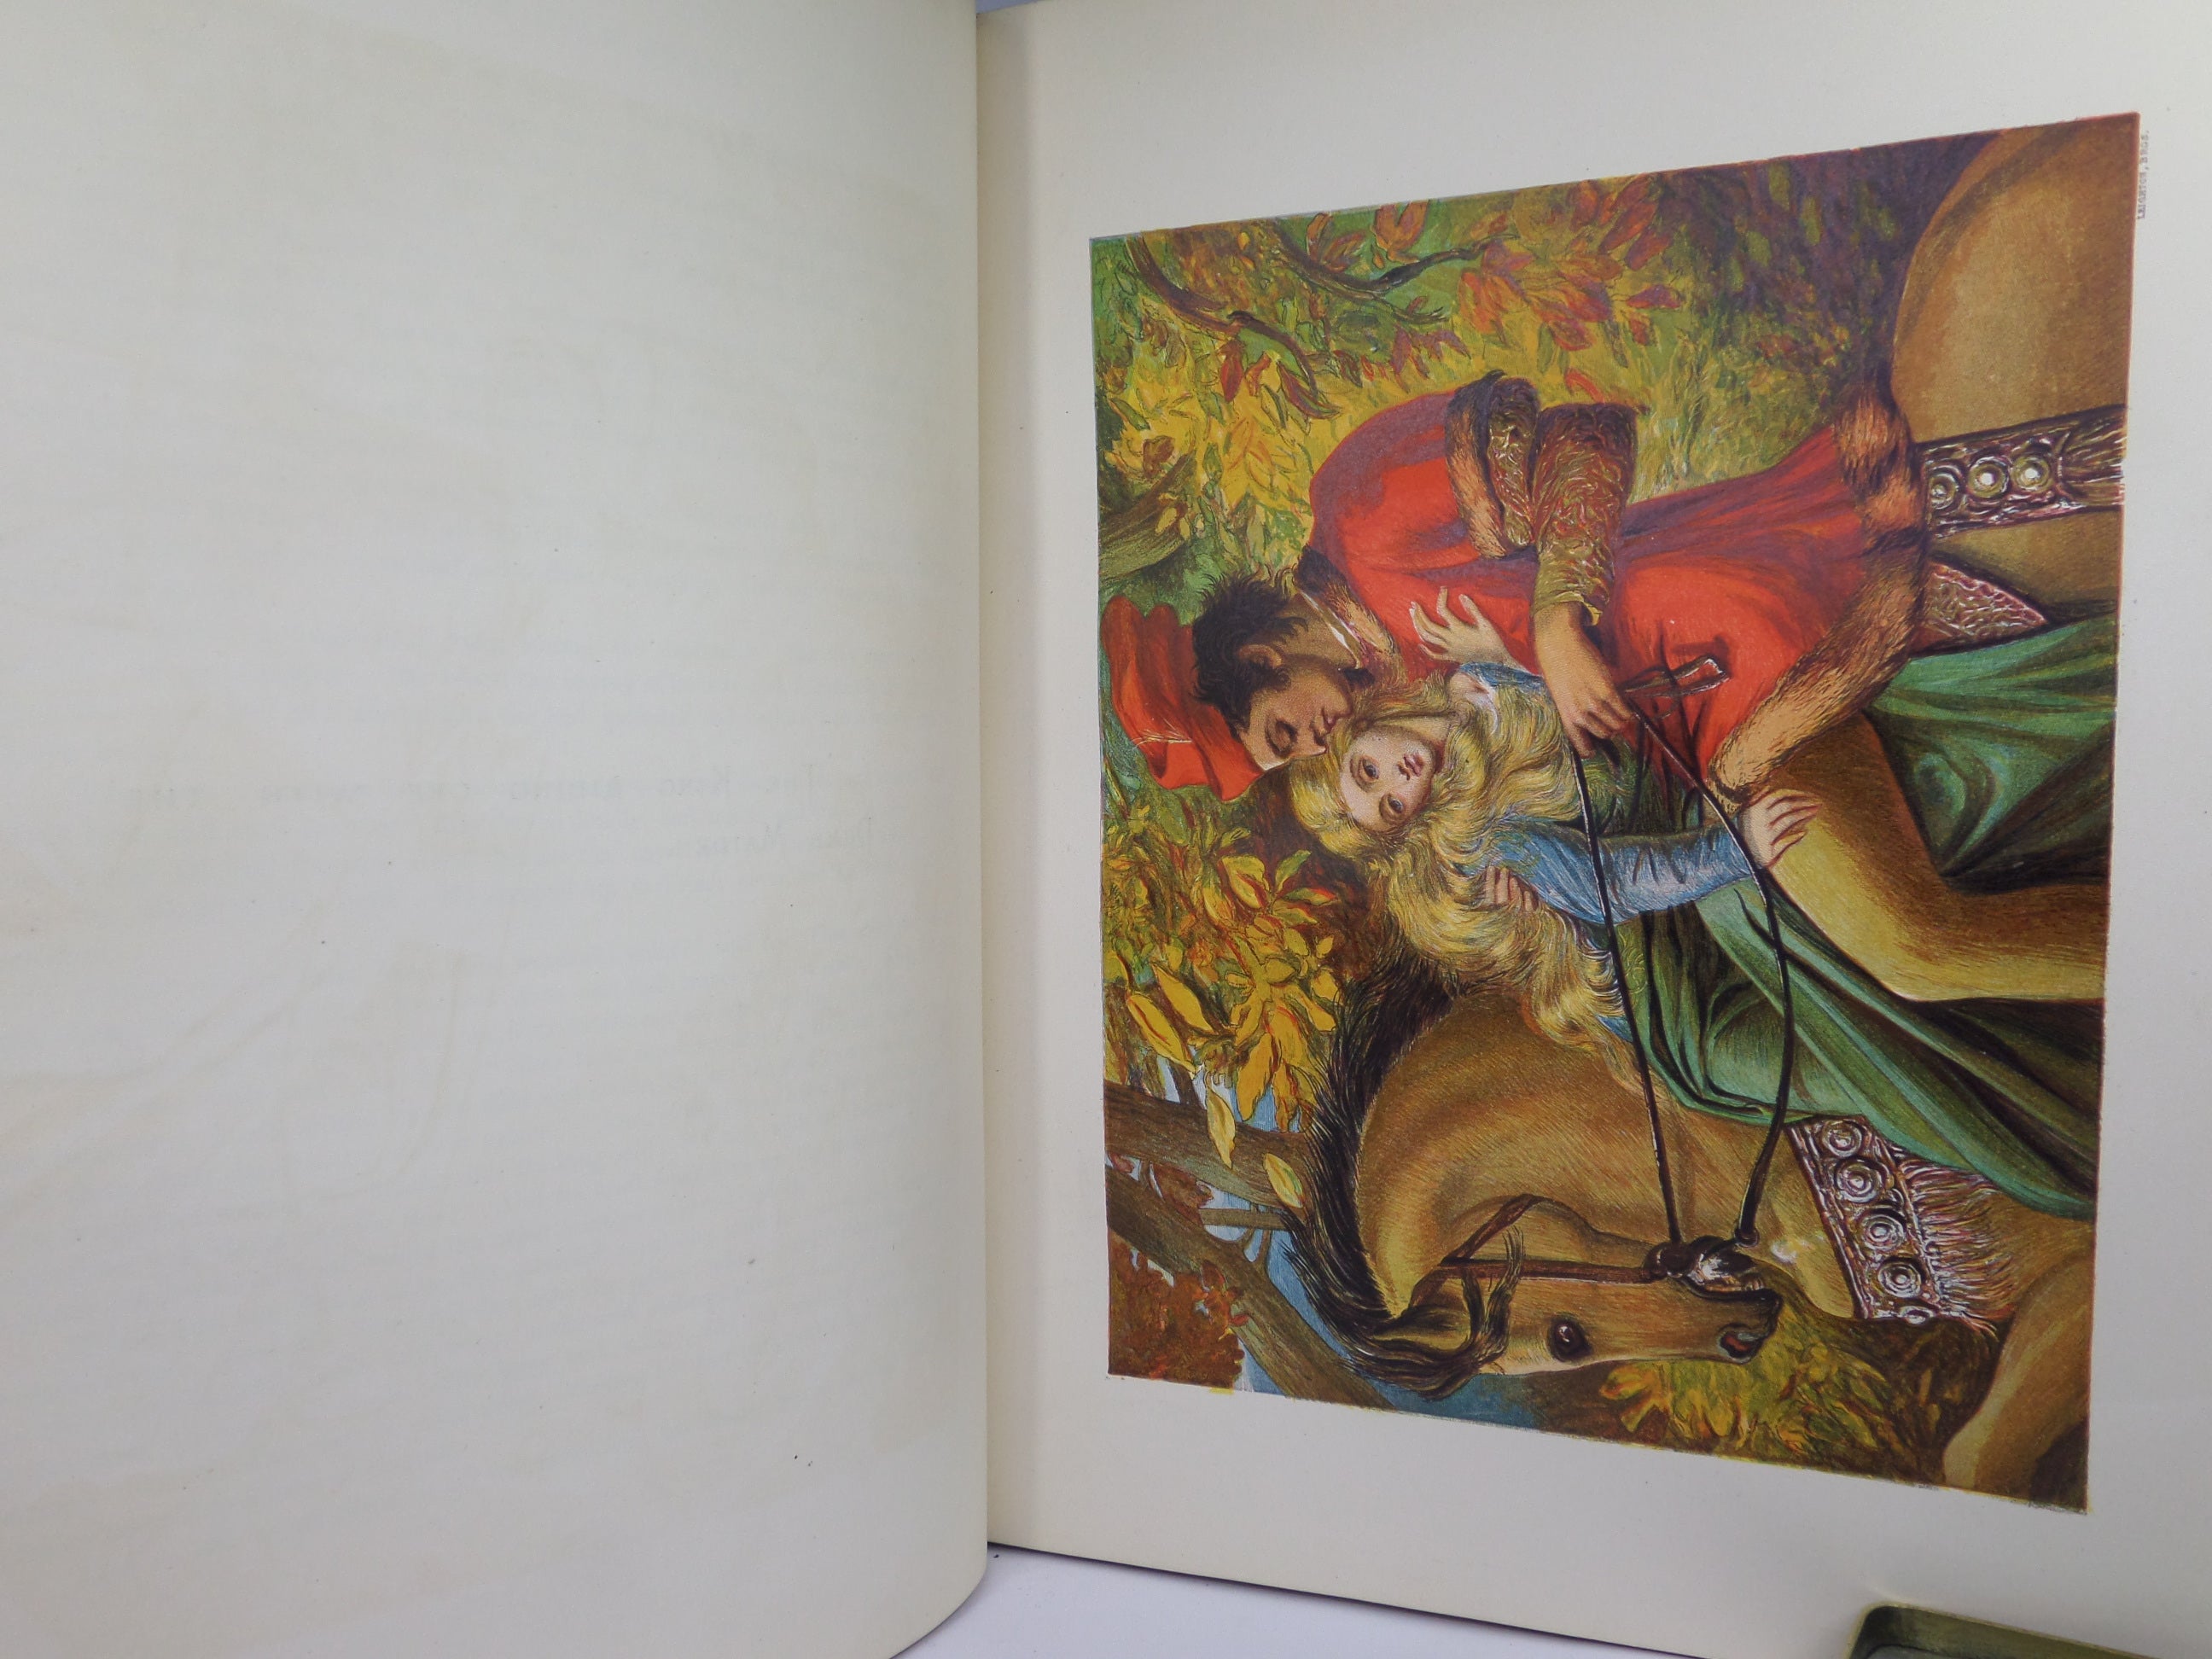 FAIRY TALES BY HANS CHRISTIAN ANDERSEN 1872 ILLUSTRATED BY ELEANOR VERE BOYLE